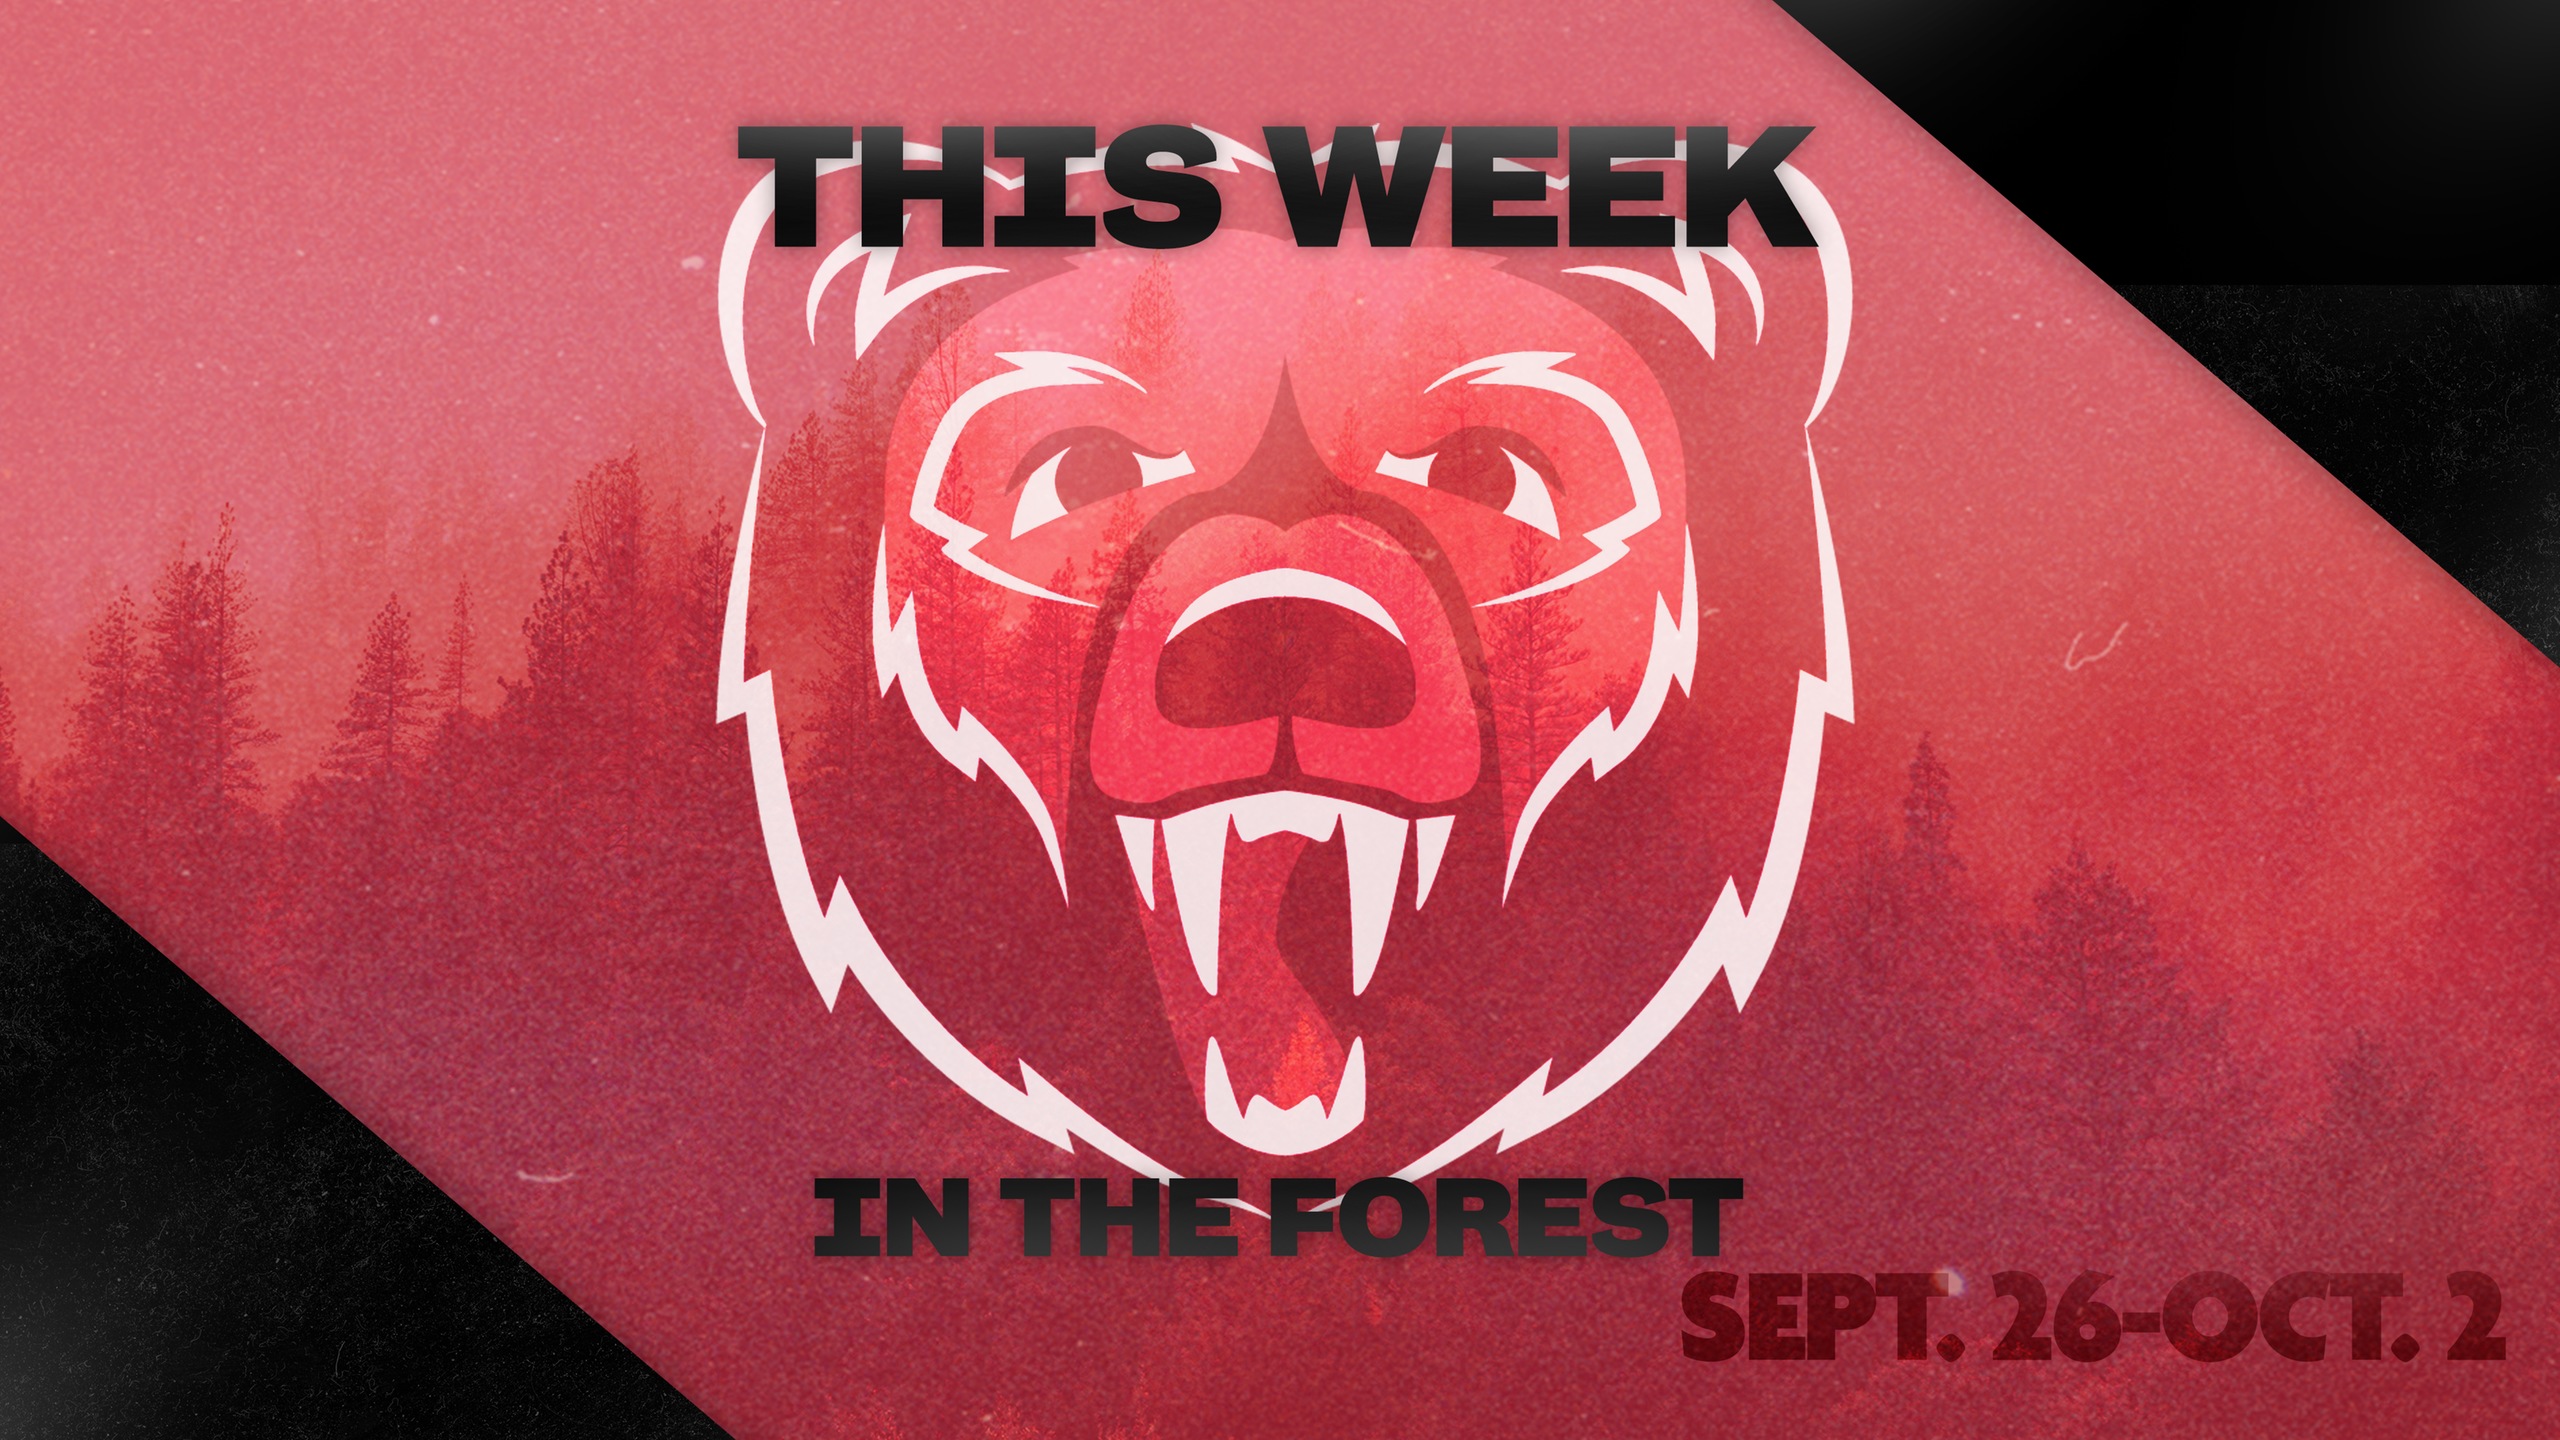 This Week in The Forest Sept. 26-Oct. 2